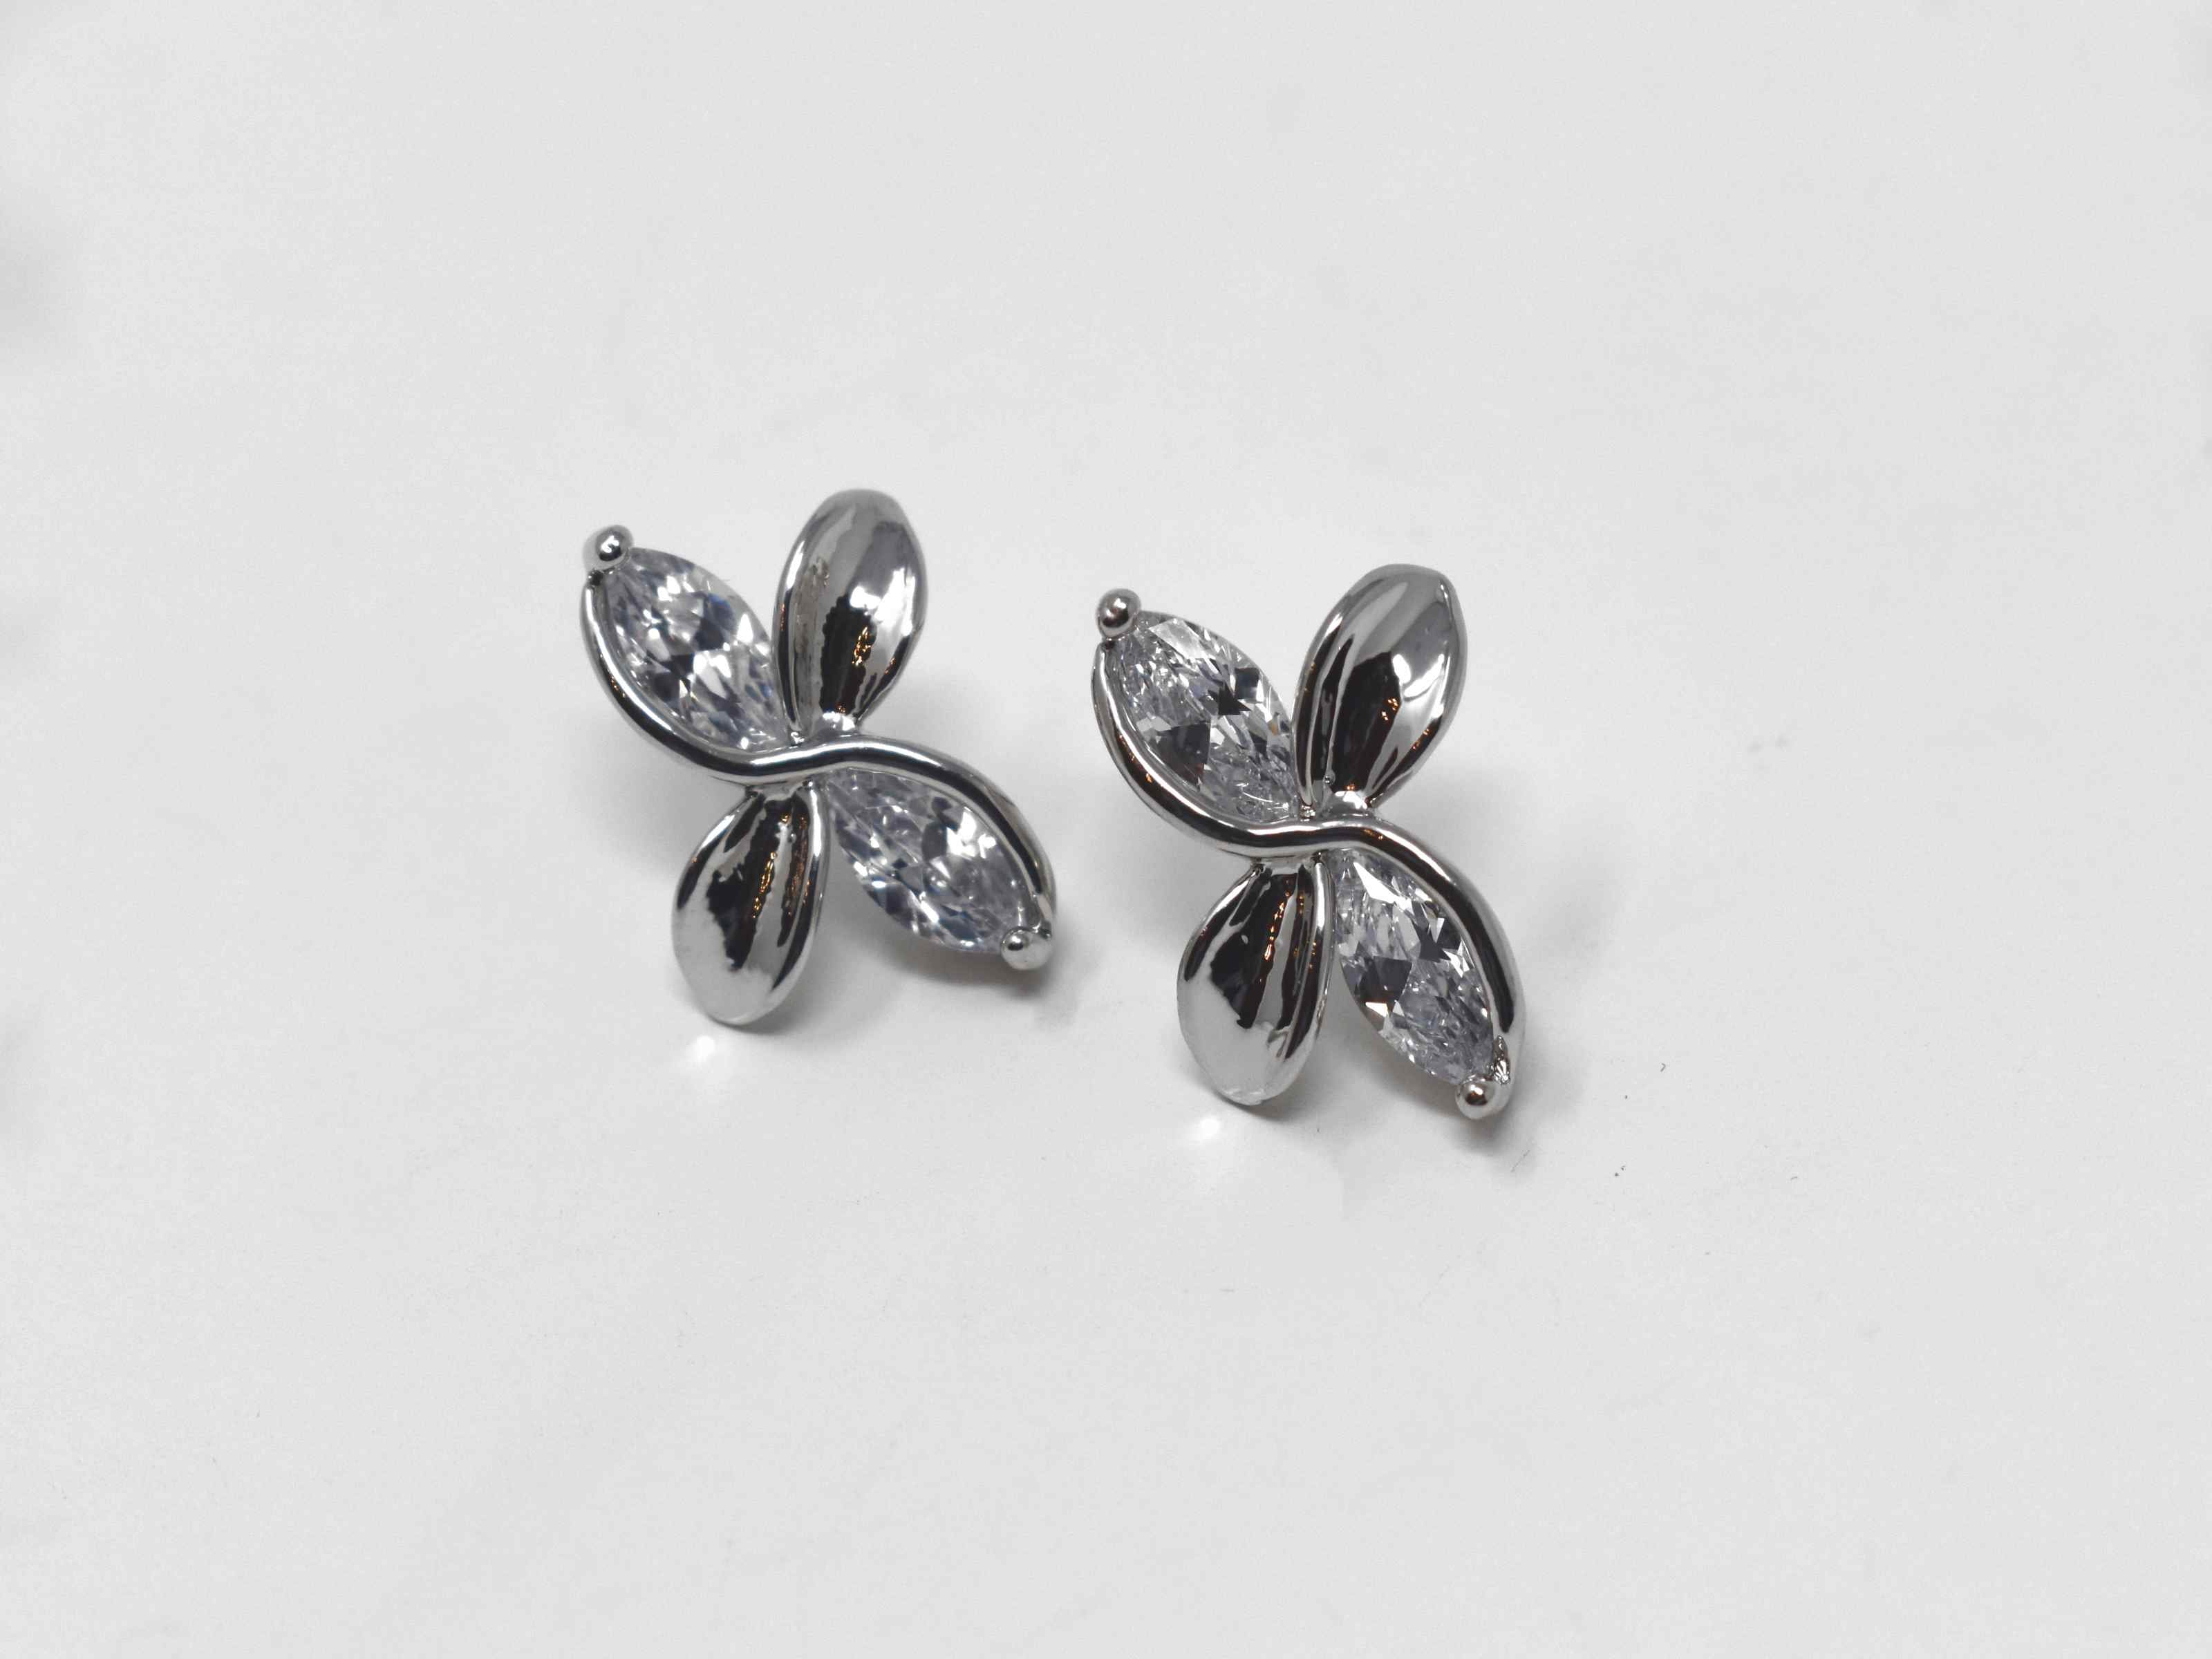 Our delicate and chic frangipani earrings are so versatile to help walk you through your style journey. They are a silver tone knob earrings with silver stones and a  push back clasp.